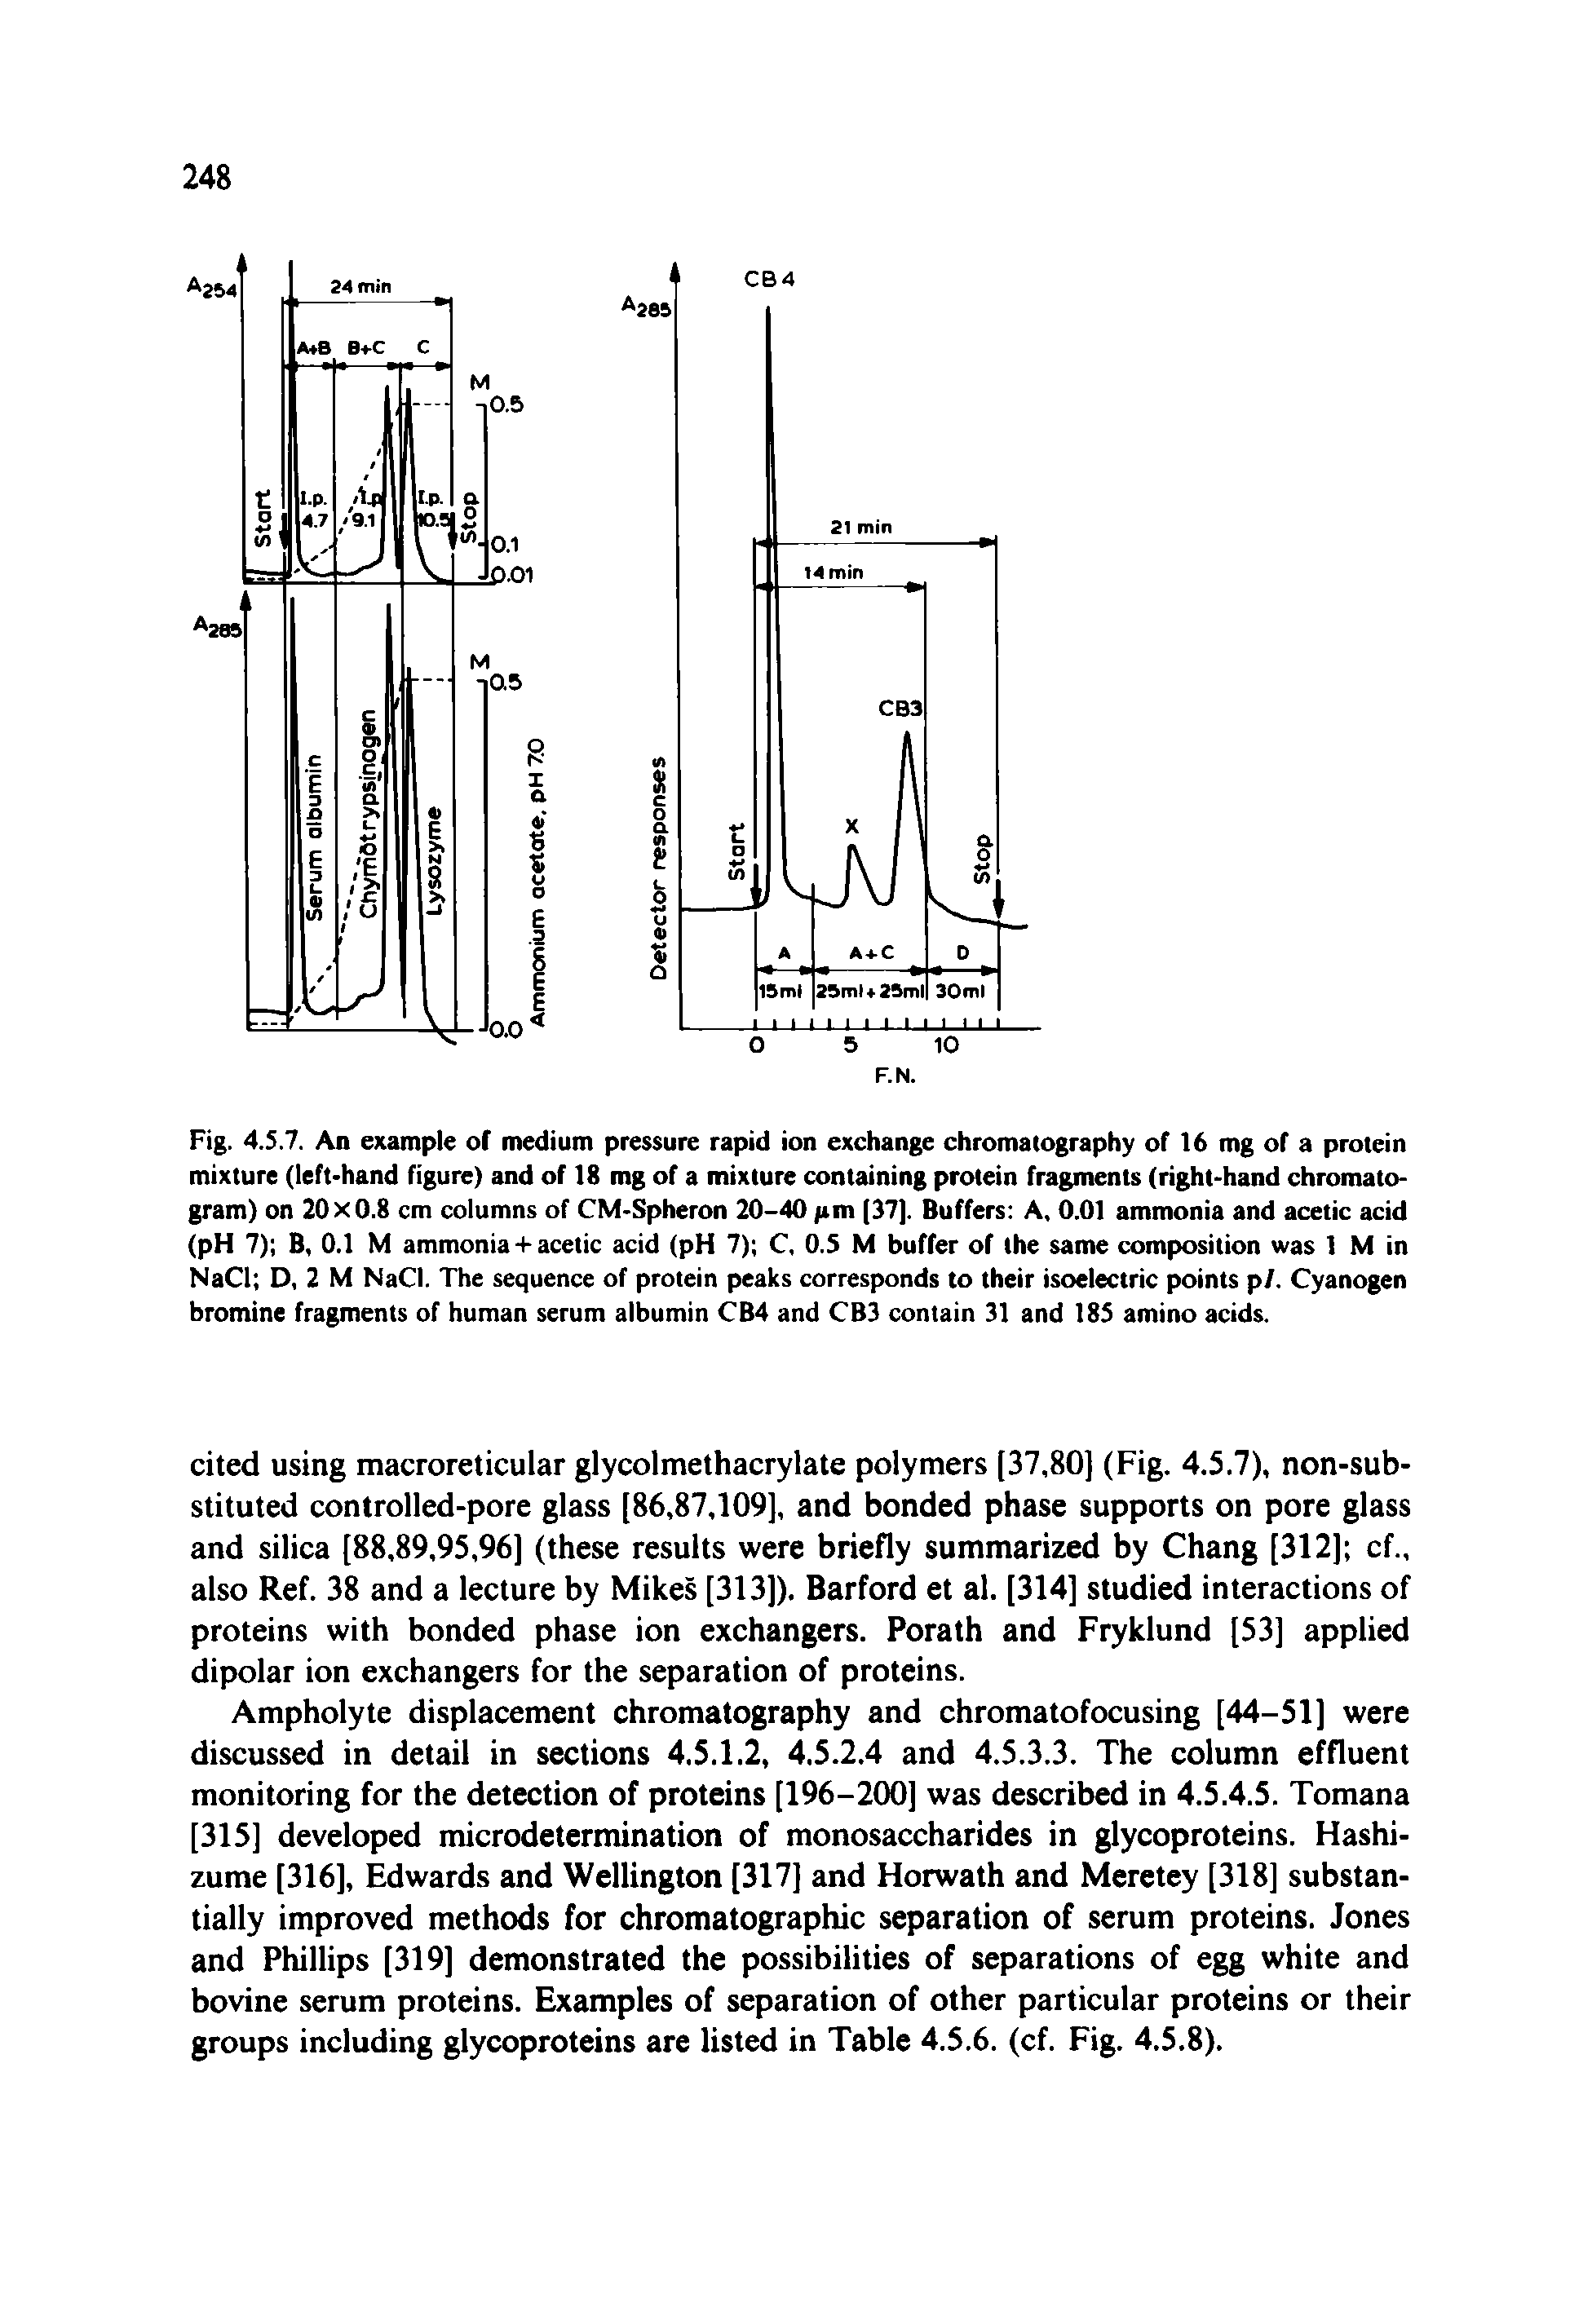 Fig. 4.5.7. An example of medium pressure rapid ion exchange chromatography of 16 mg of a protein mixture (left-hand figure) and of 18 mg of a mixture containing protein fragments (right-hand chromatogram) on 20x0.8 cm columns of CM-Spheron 20-40 /im (37). Buffers A, 0.01 ammonia and acetic acid (pH 7) B, 0.1 M ammonia + acetic acid (pH 7) C, O.S M buffer of the same composition was 1 M in NaCl D, 2 M NaCI. The sequence of protein peaks corresponds to their isoelectric points pi. Cyanogen bromine fragments of human serum albumin CB4 and CB3 contain 31 and 185 amino acids.